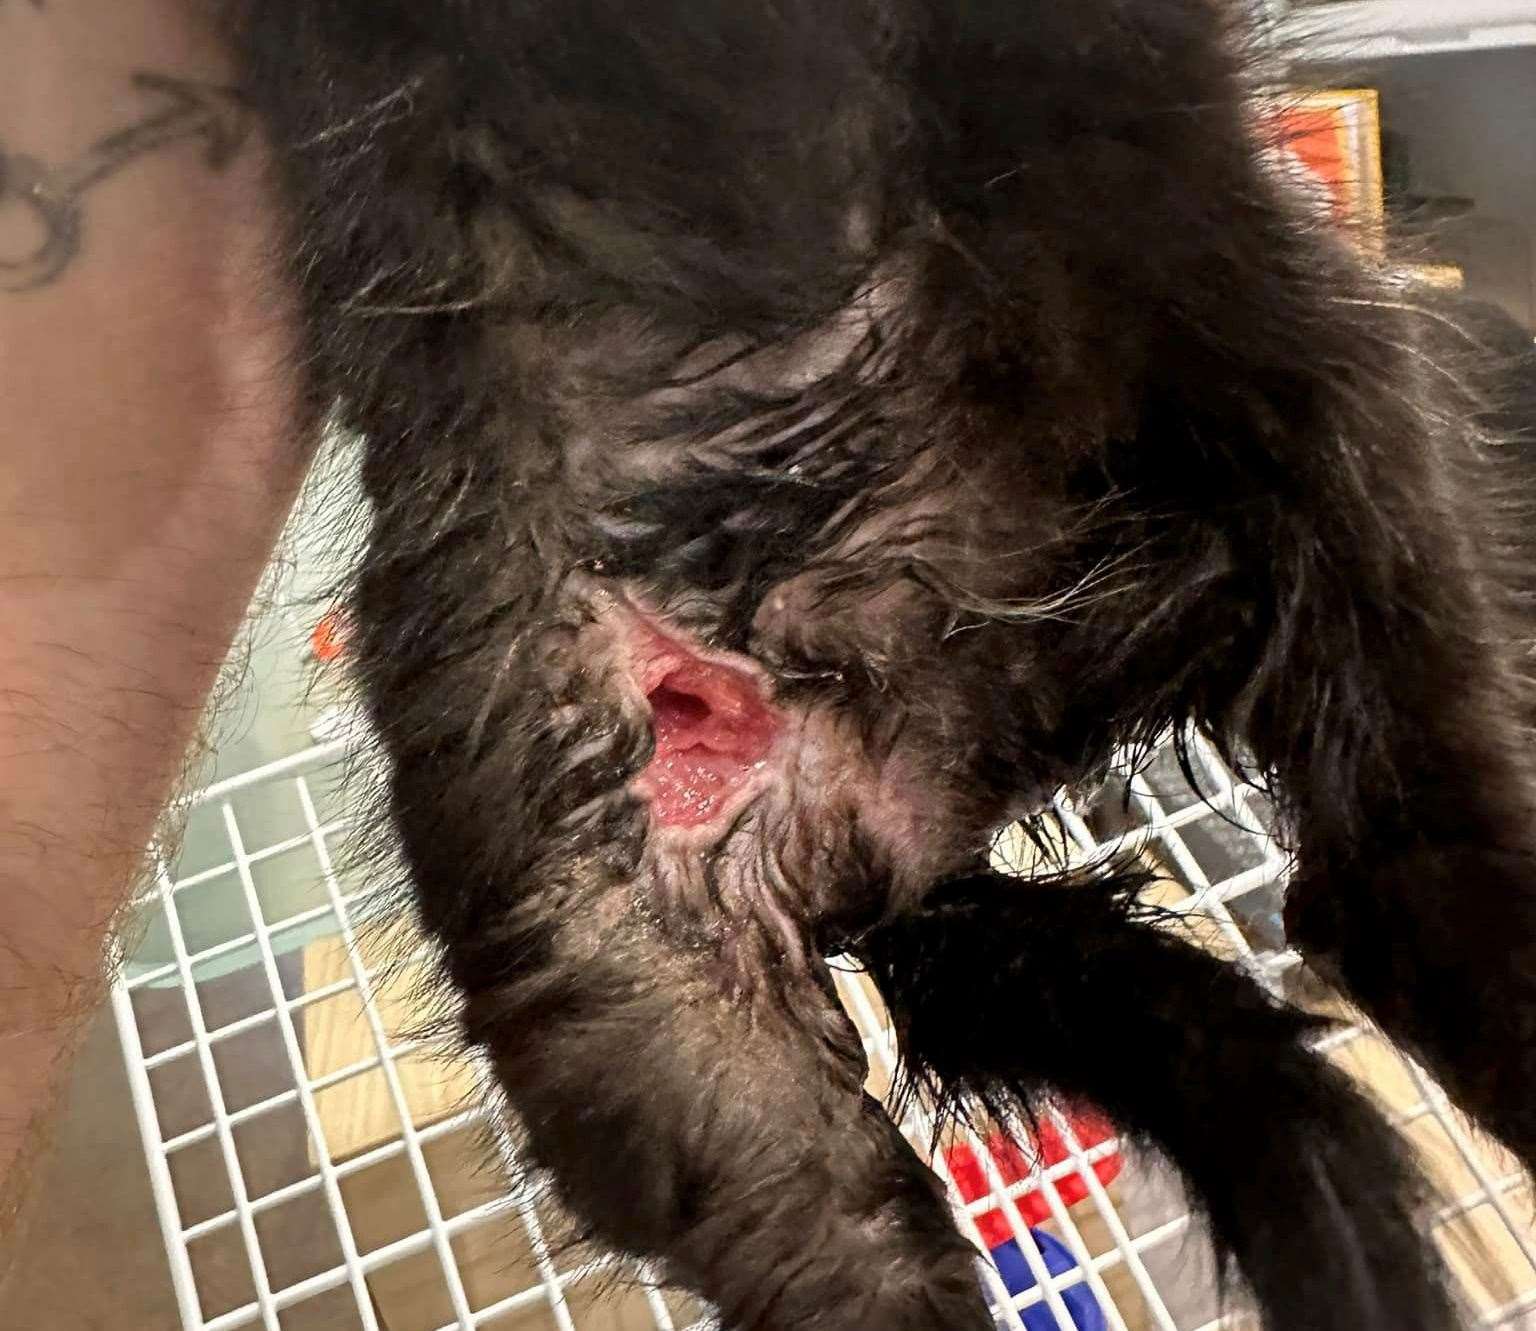 One of Edwina’s puncture wounds. Picture: Wisteria Cat Rescue